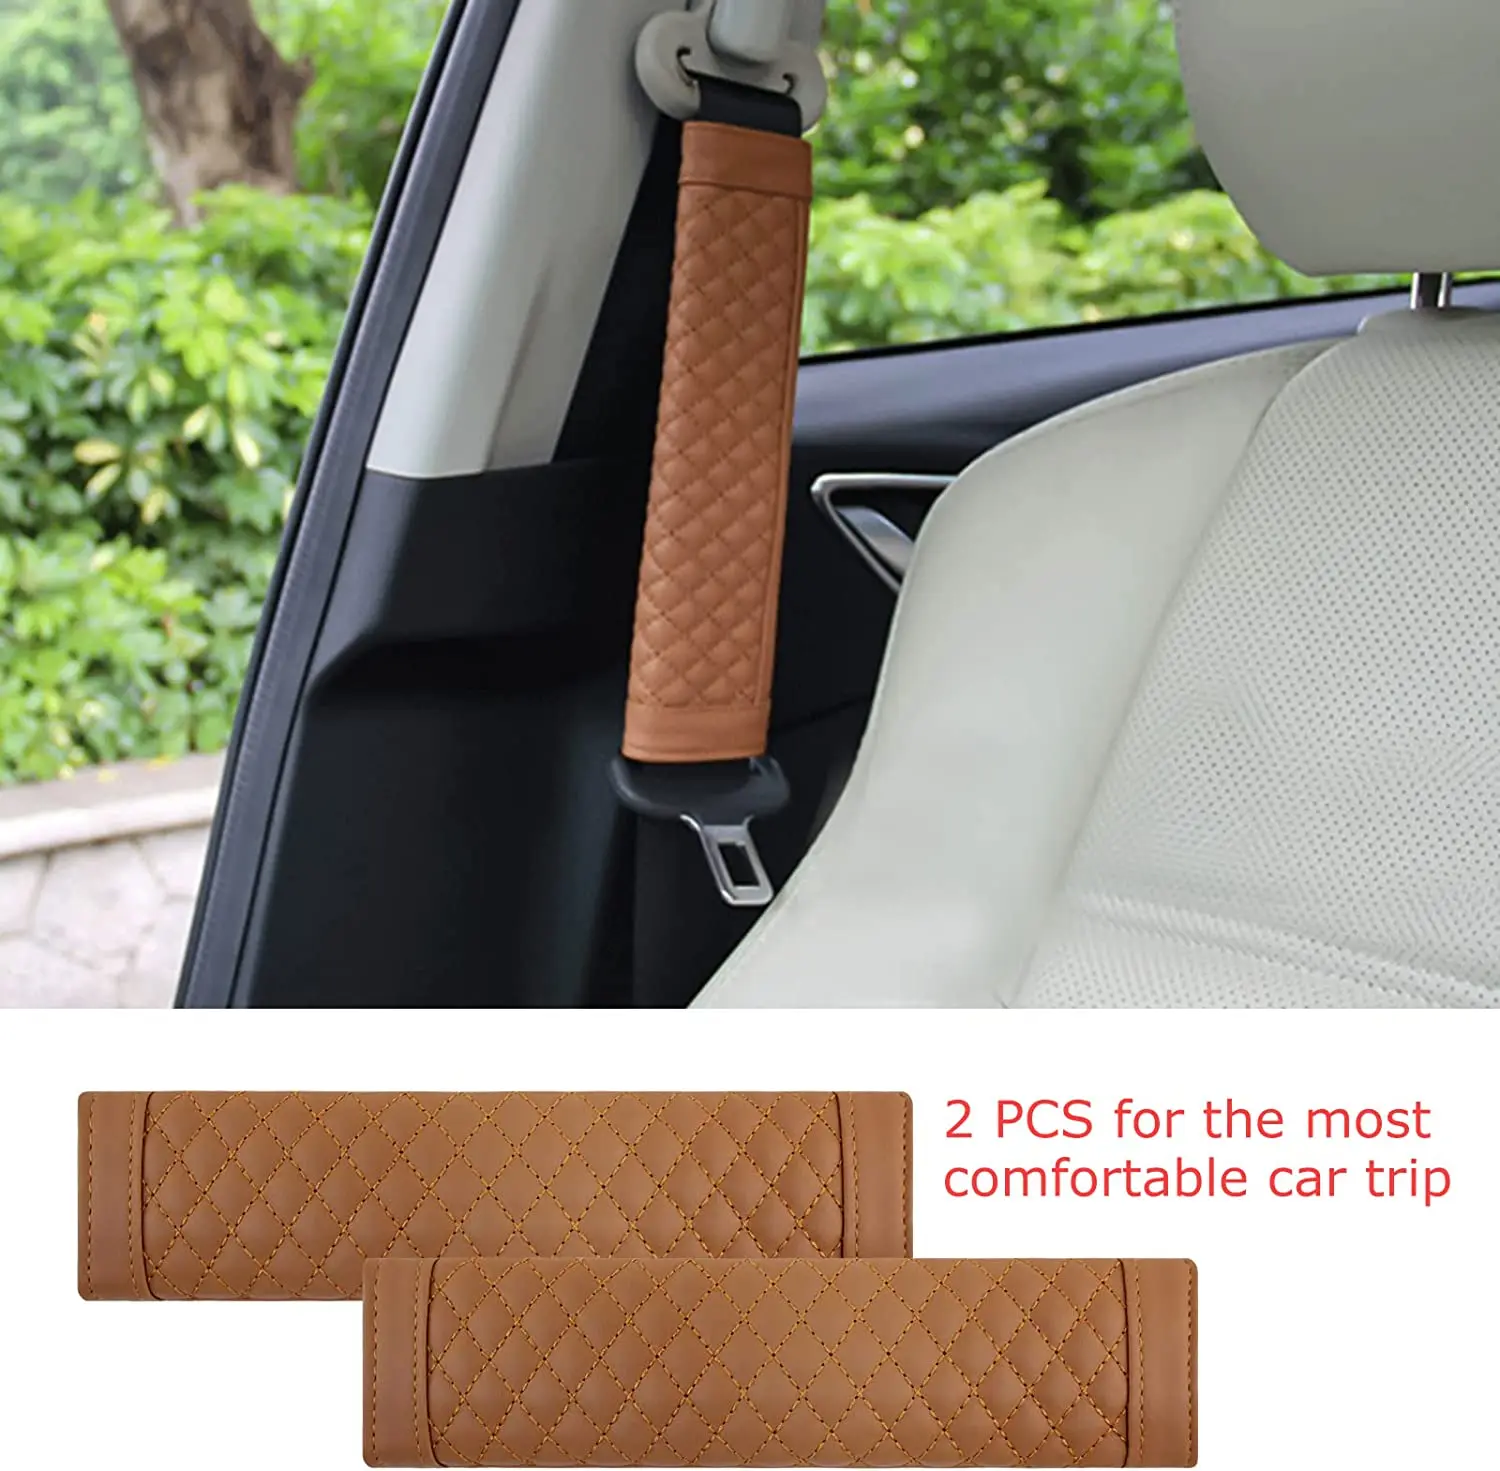 Boshiho 2 packs Car Seat Belt leather Cover Seat Belt Buckle Cover Seatbelt Pad For A More Comfortable Driving